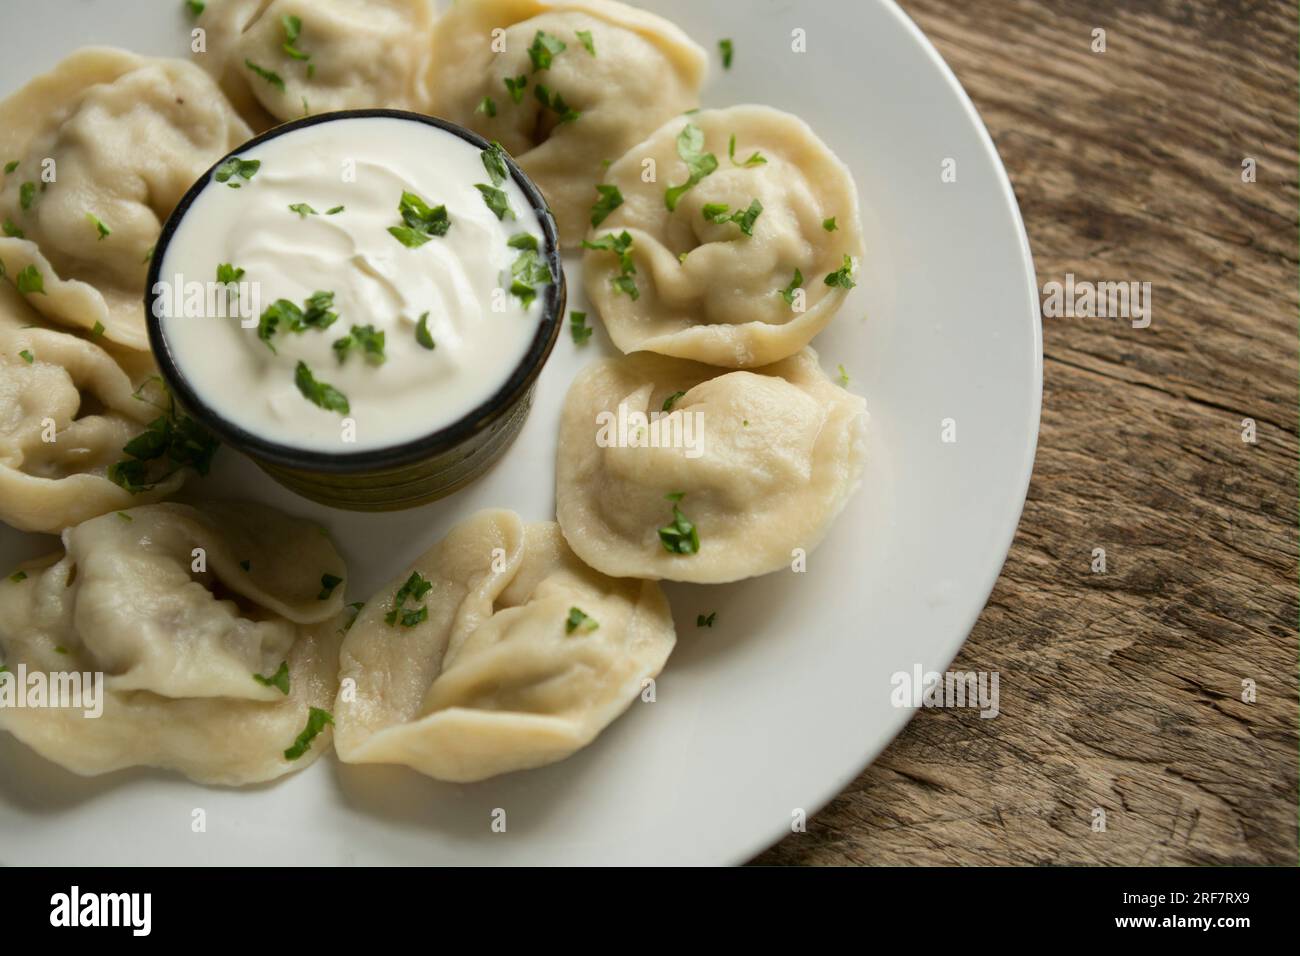 Homemade Russian dumplings, or Pelmeni, that have been stuffed with minced pork and onion before being boiled and served with soured cream. Garnished Stock Photo